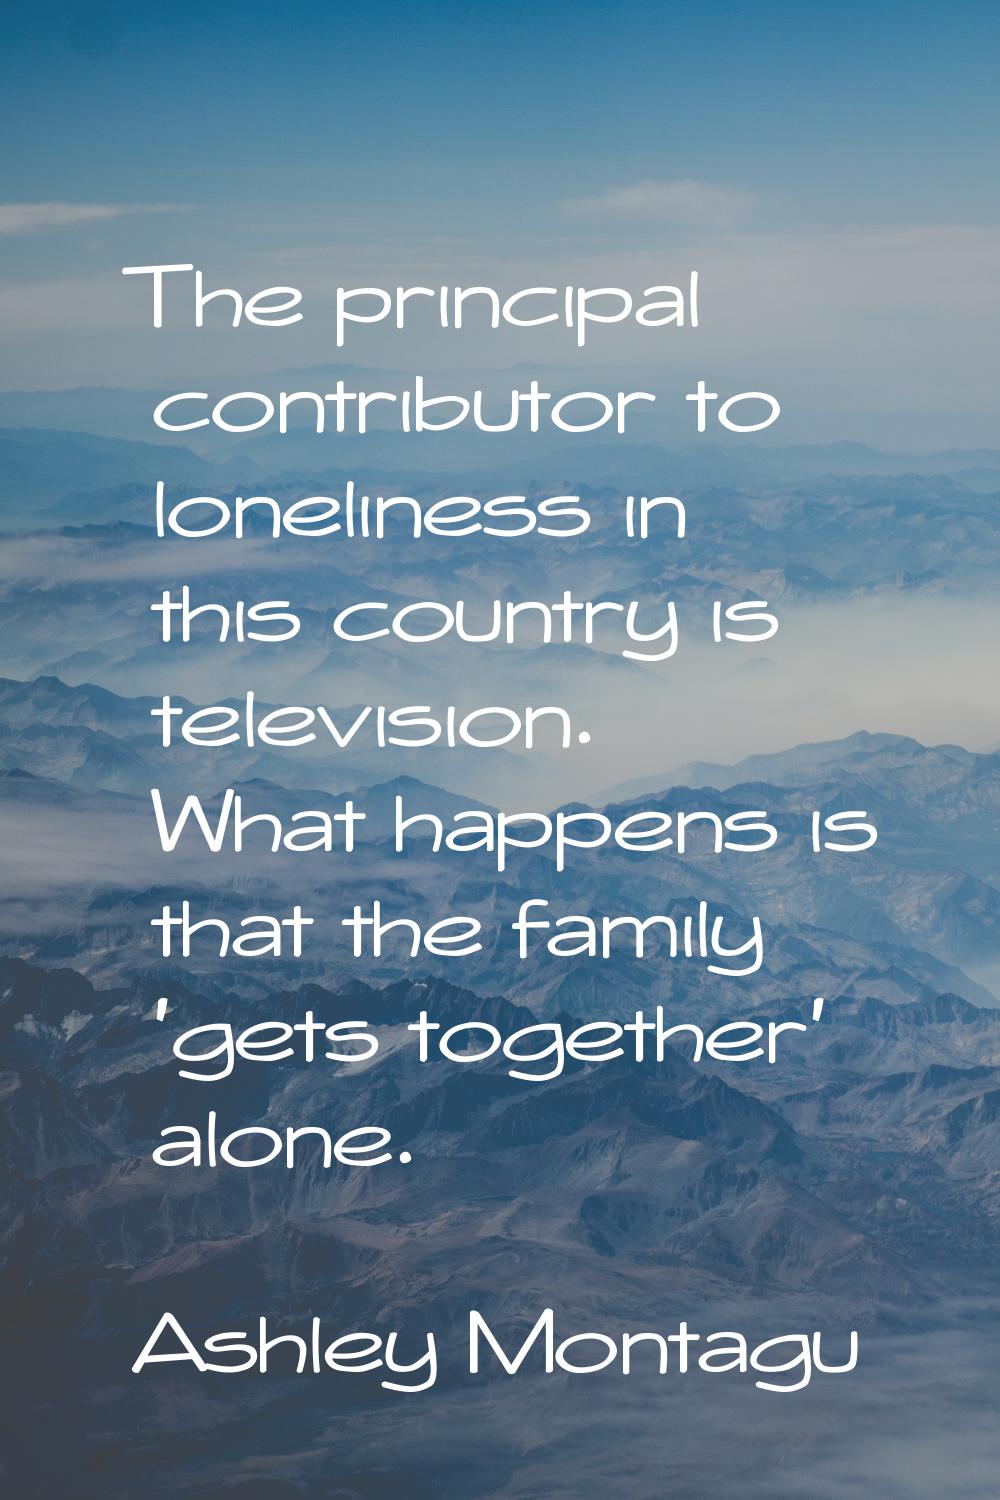 The principal contributor to loneliness in this country is television. What happens is that the fam